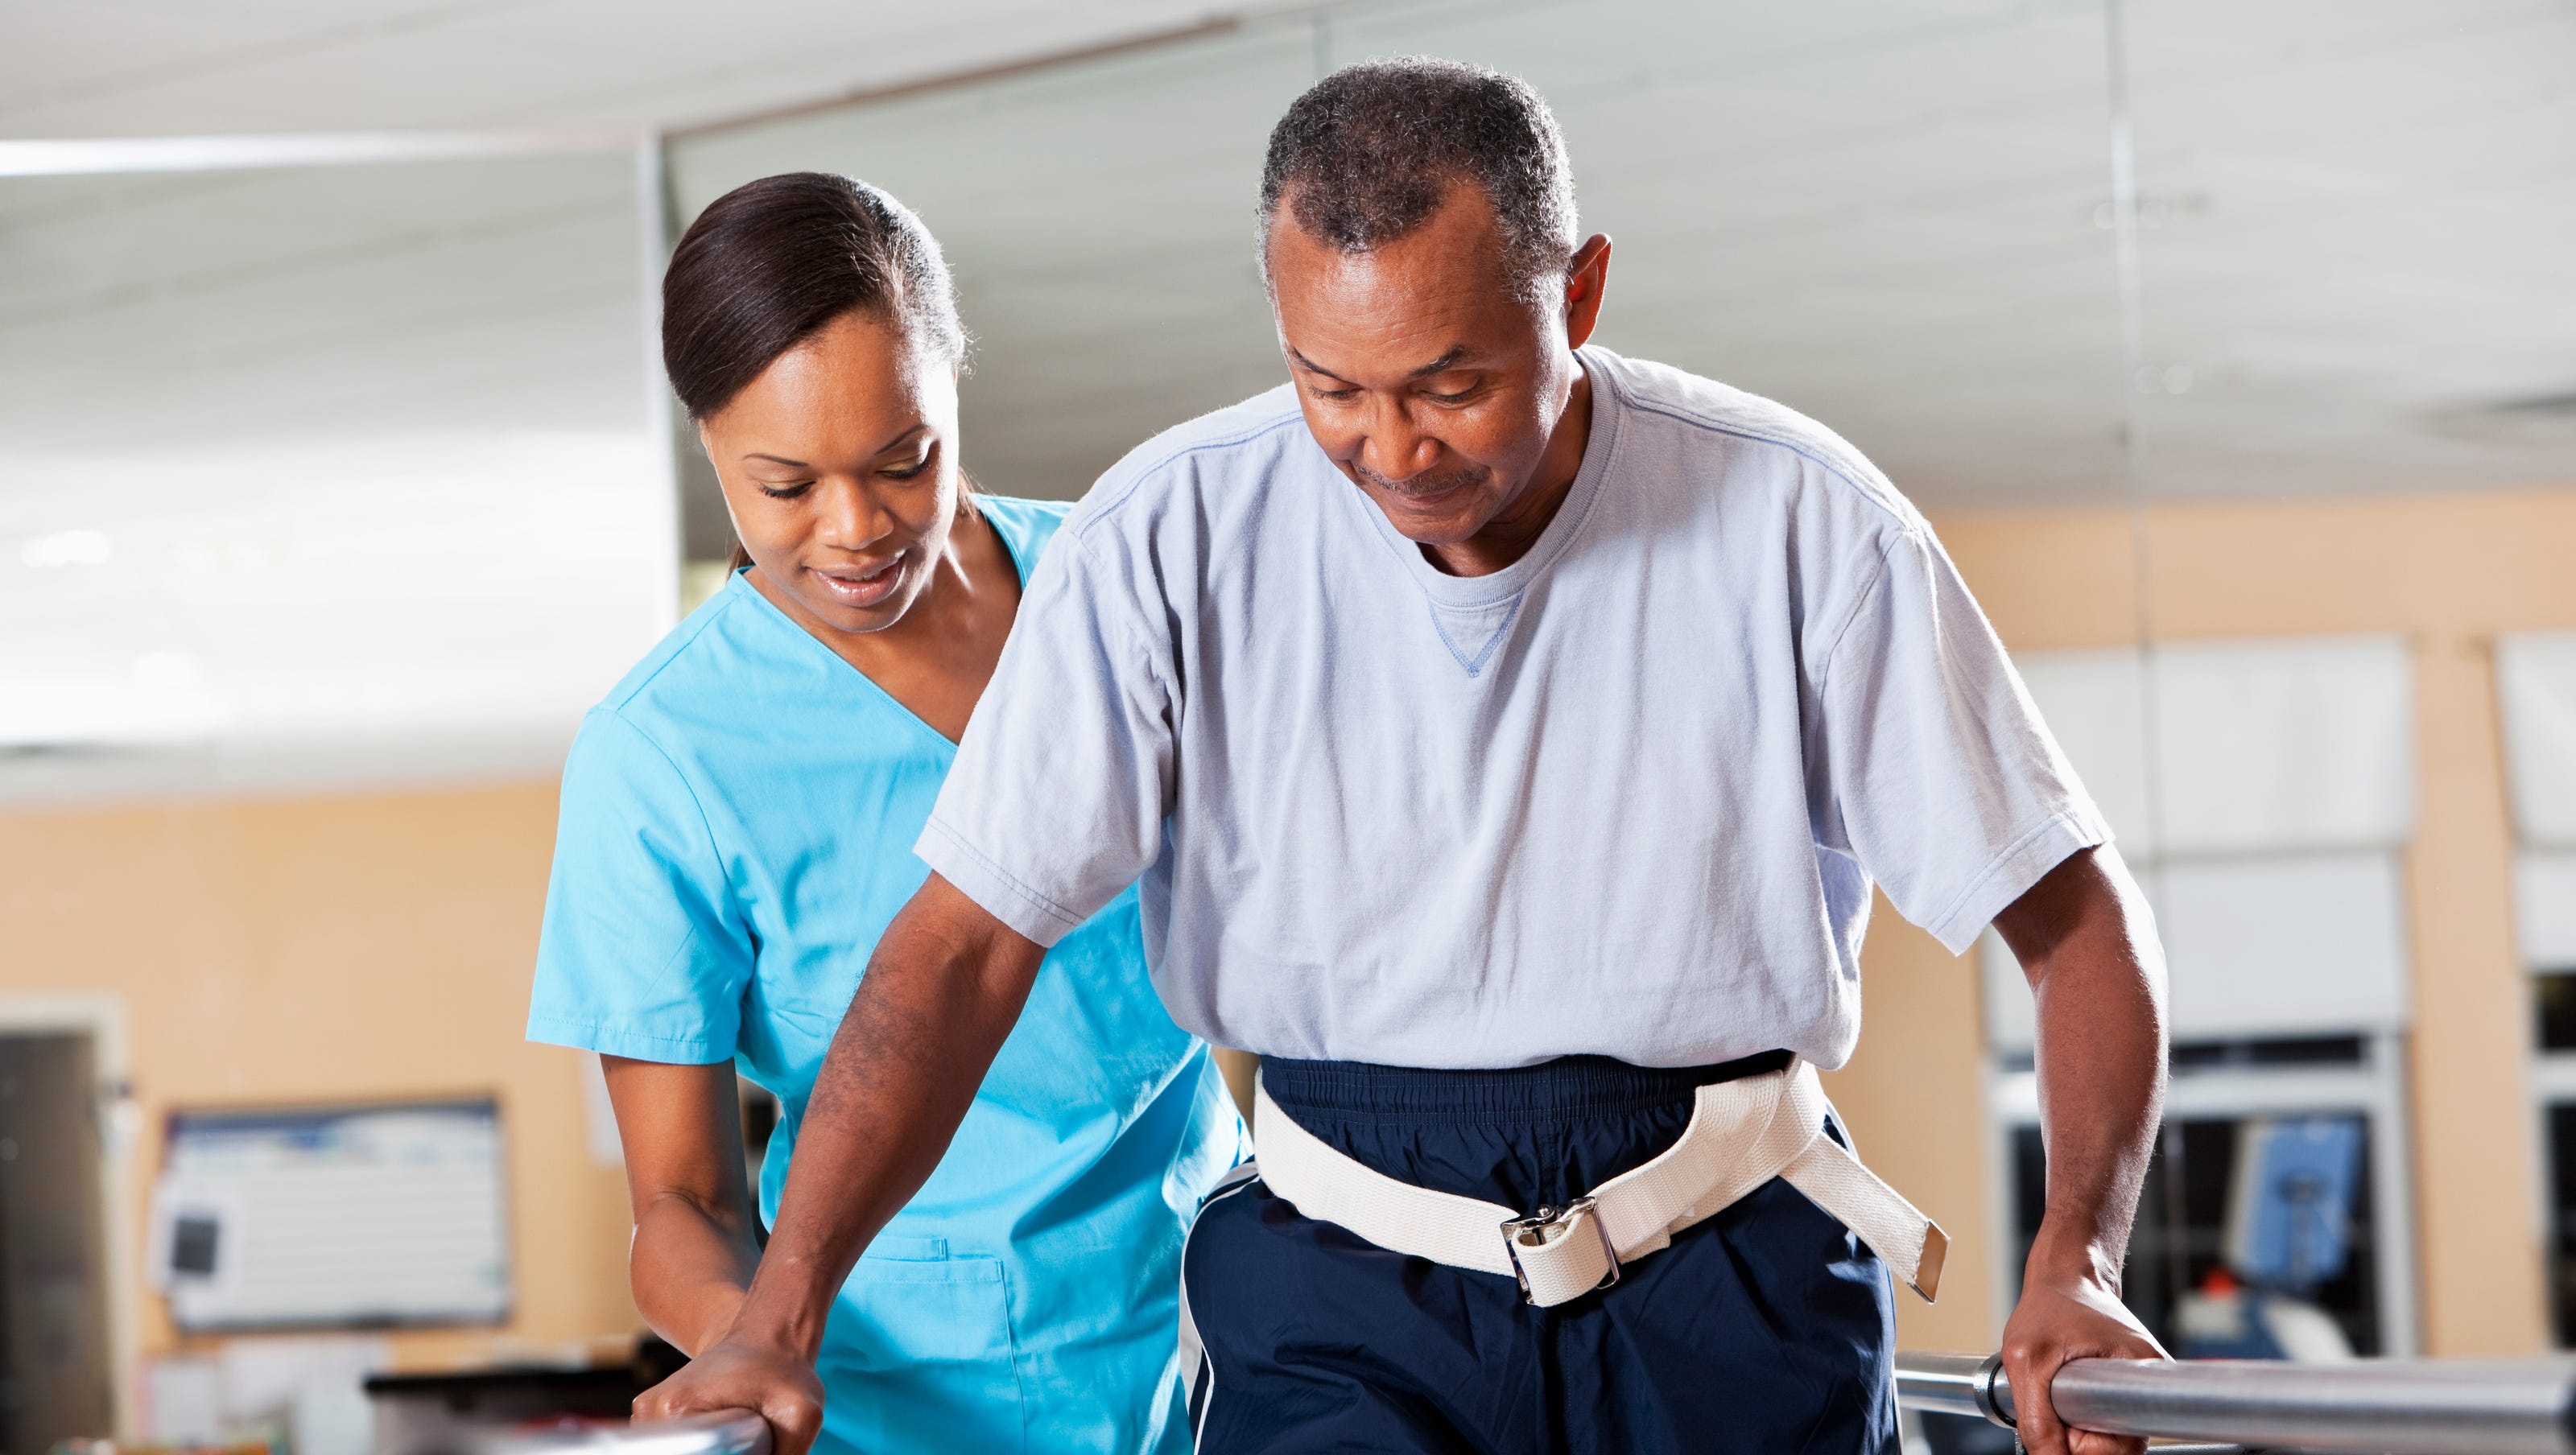 Occupational Therapists Help Patients Improve Daily Living